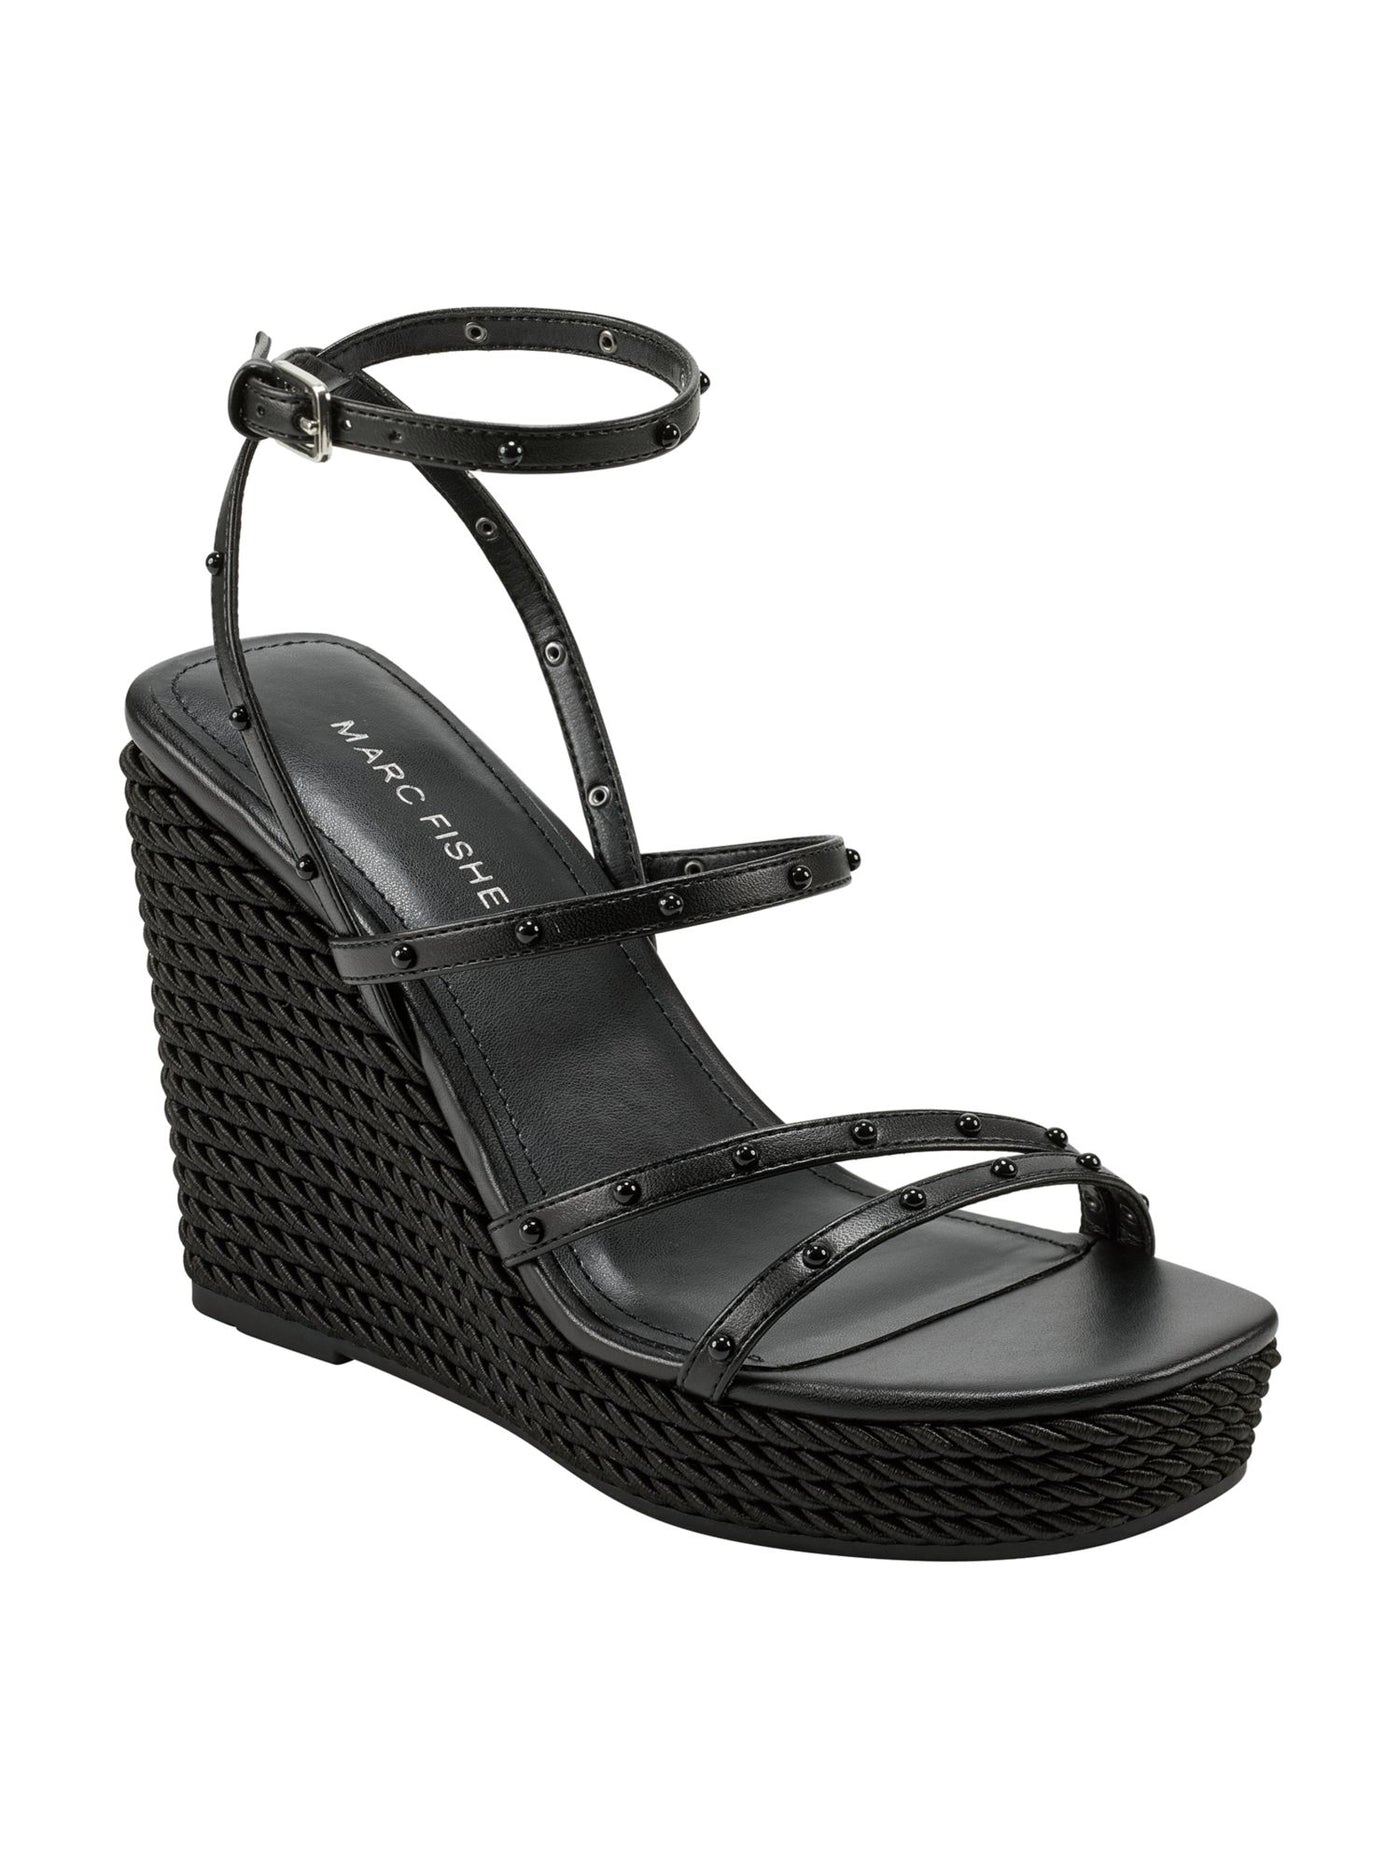 MARC FISHER Womens Black Strappy Studded Zig Square Toe Wedge Buckle Heeled Sandal 8.5 M